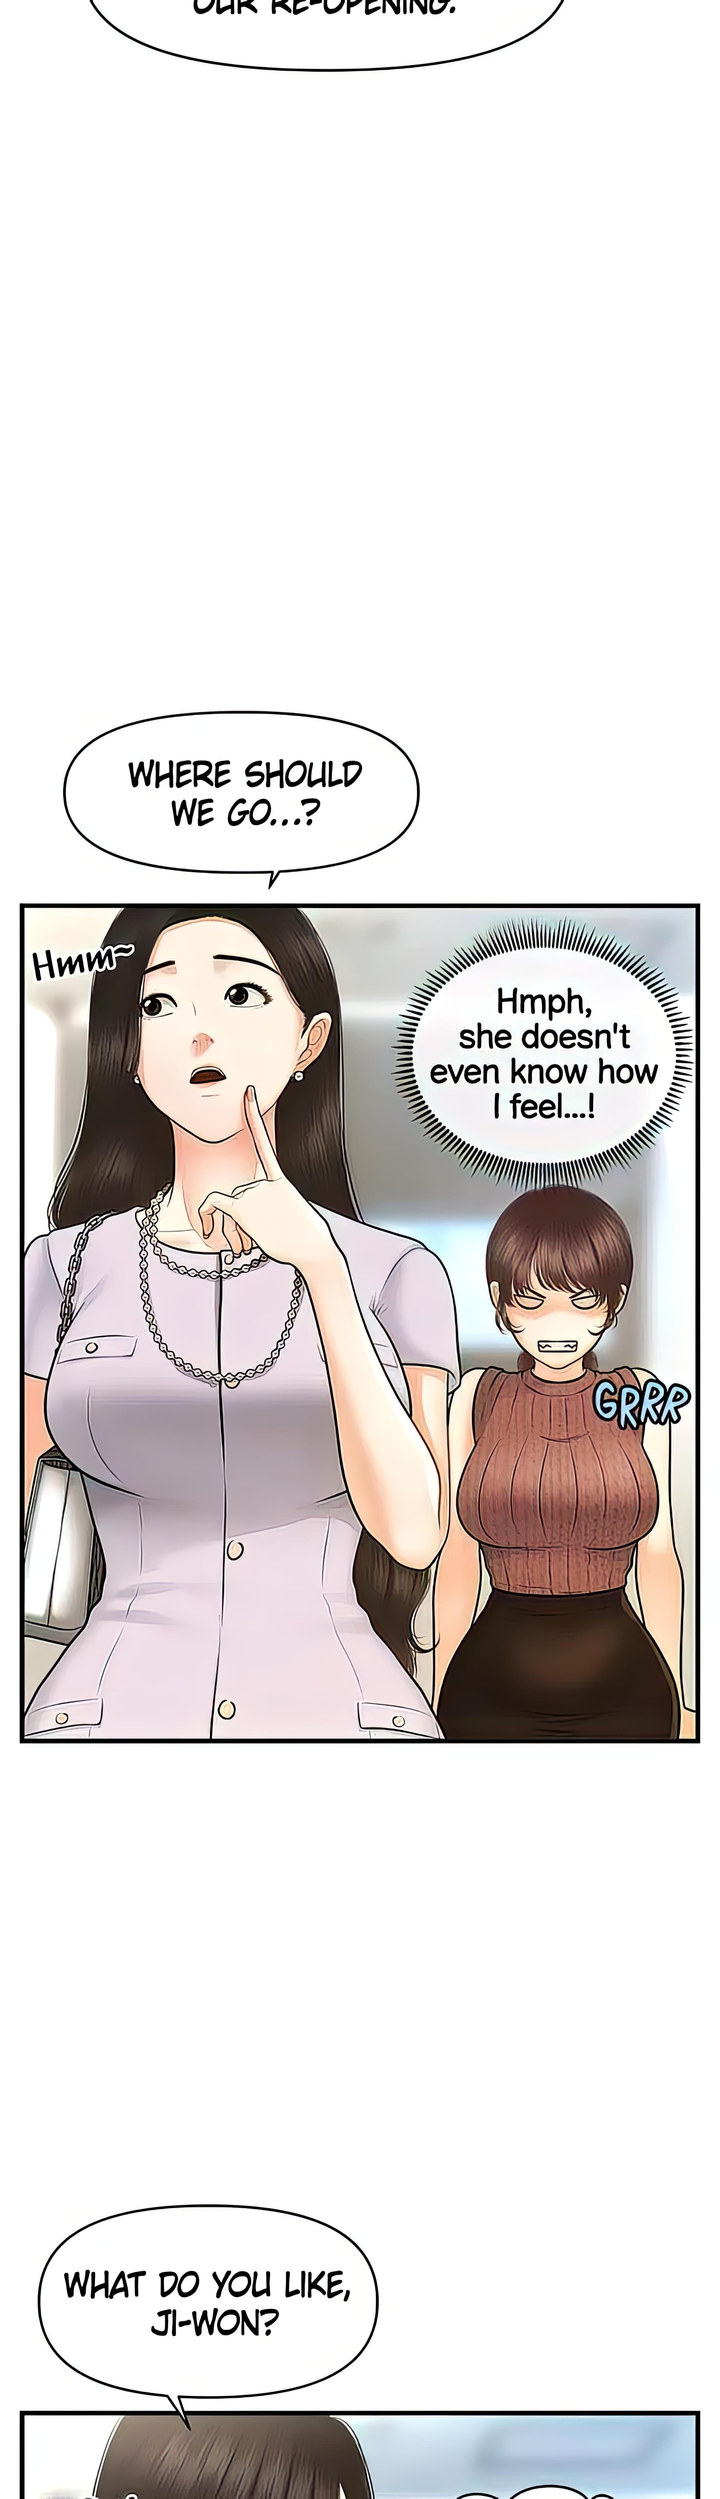 You’re so Handsome - Chapter 98 Page 17